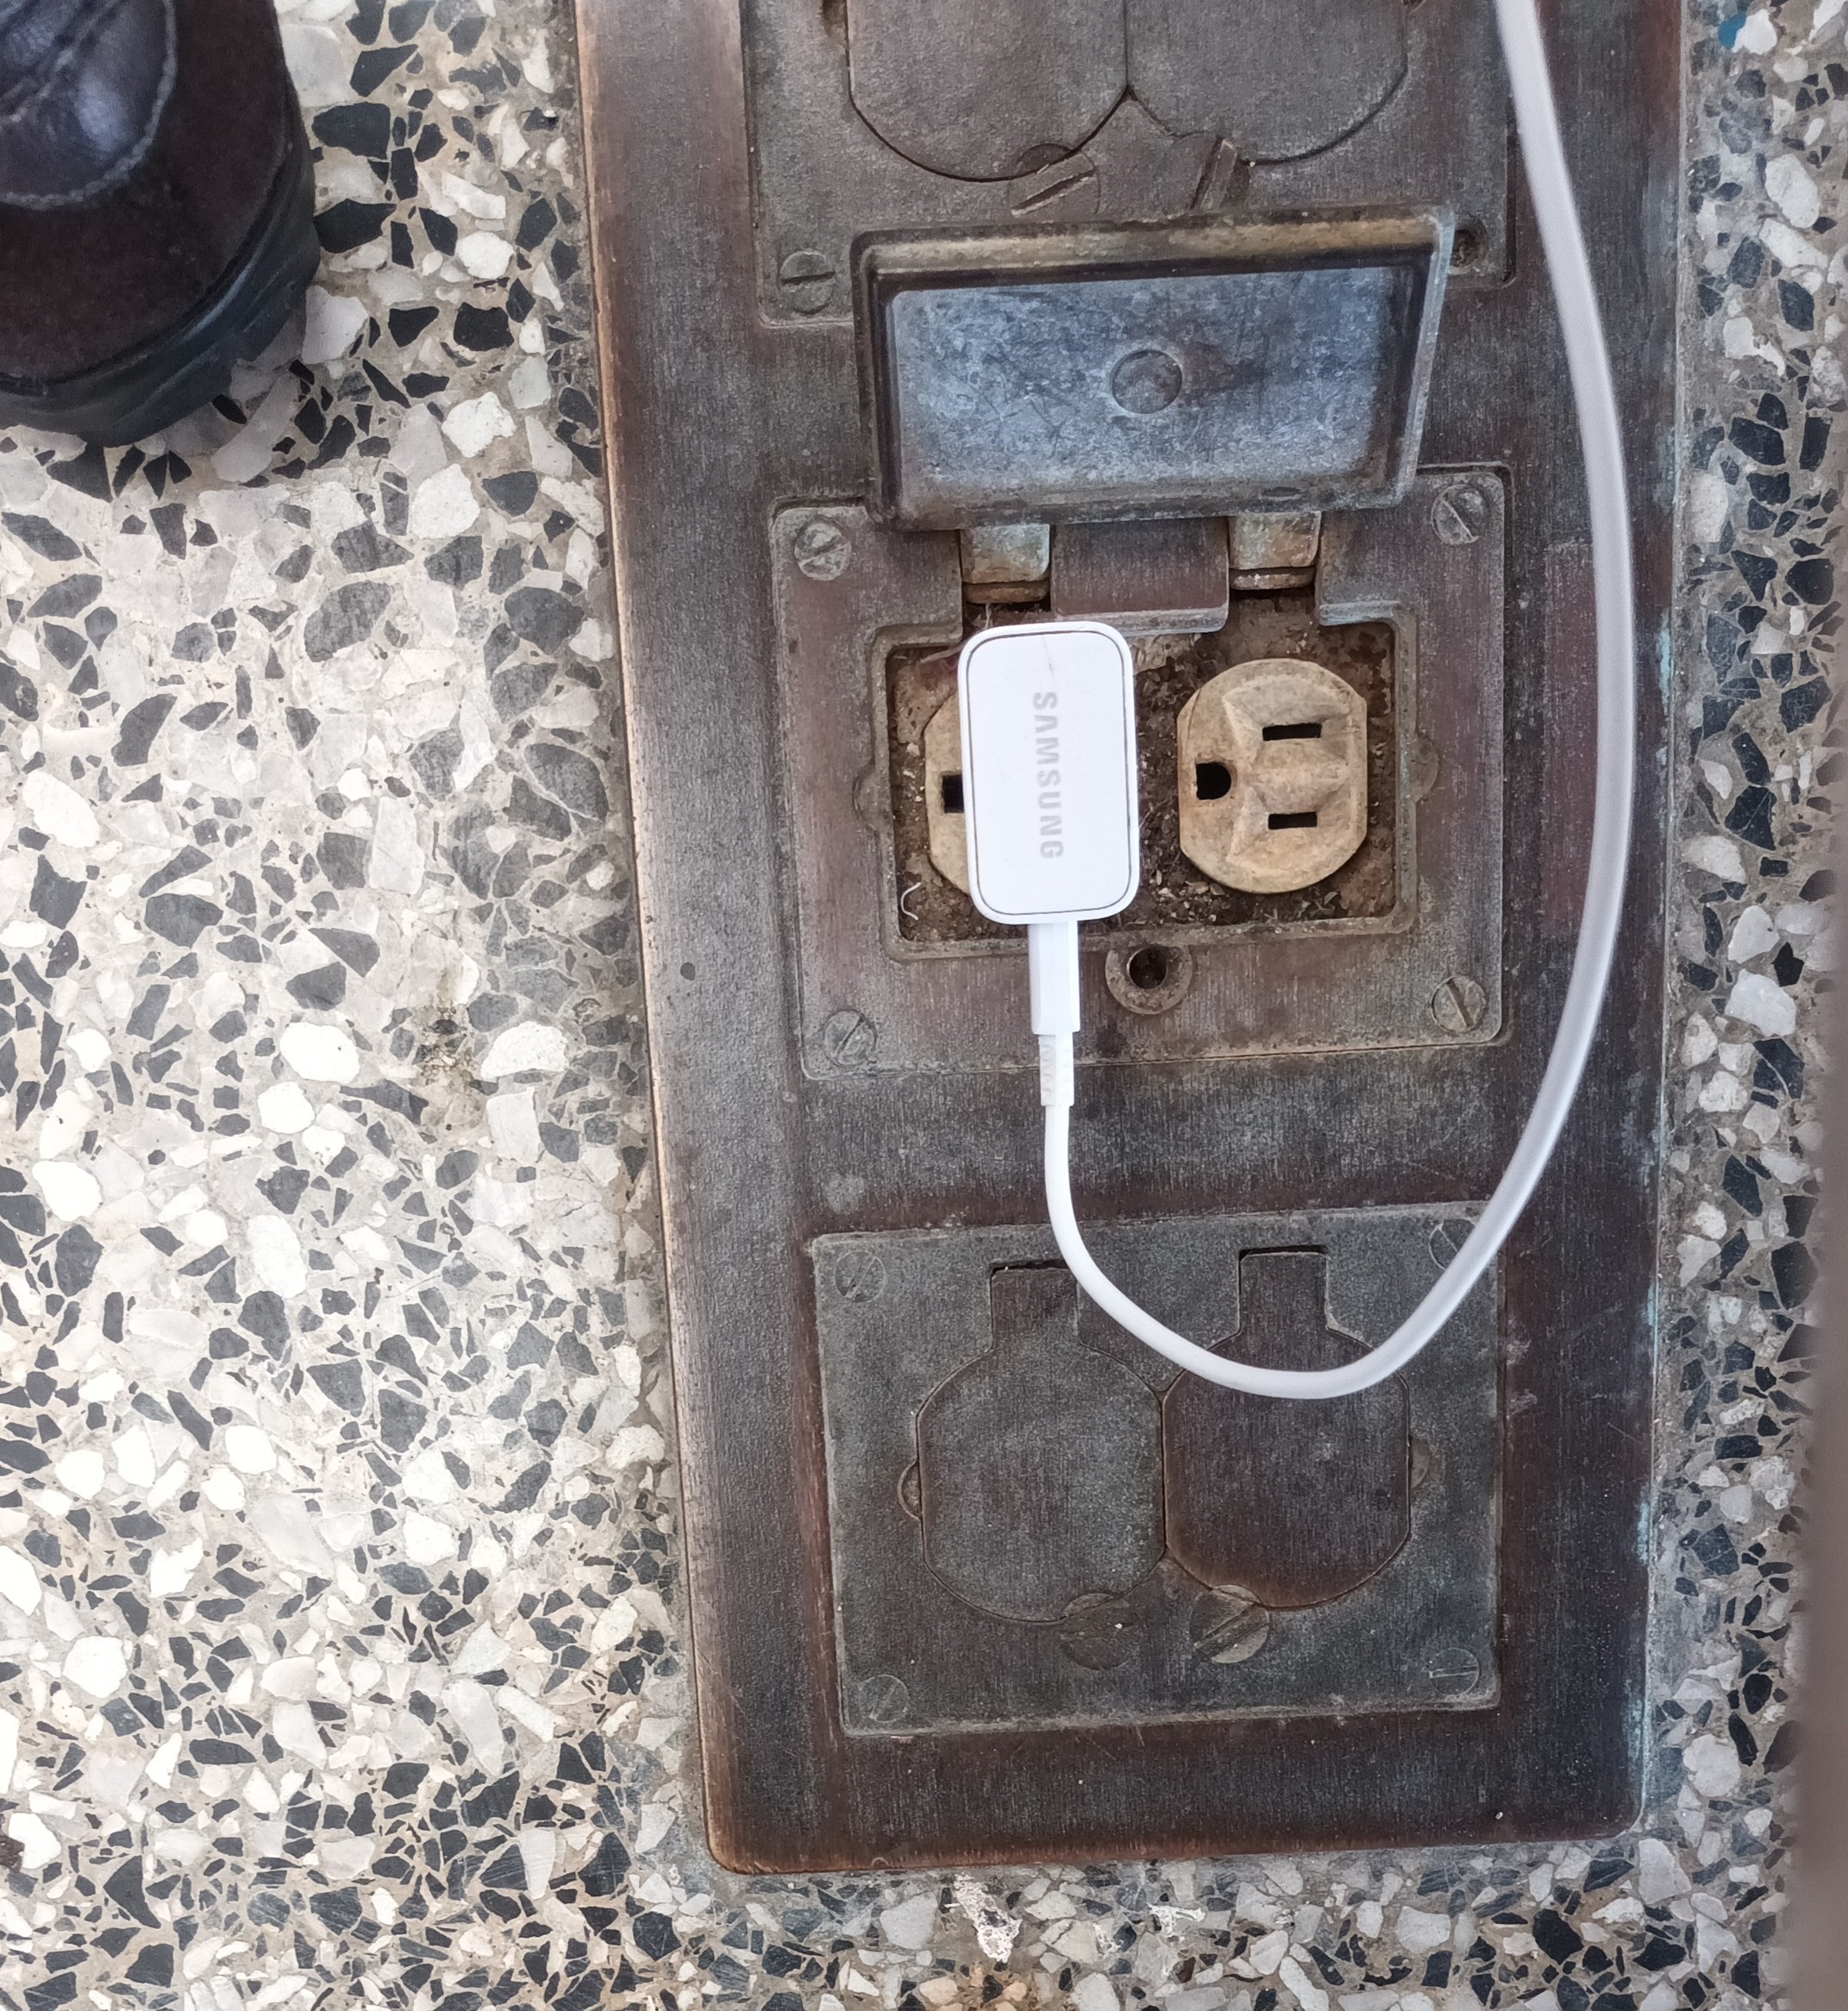 A plug with a phone charger cable